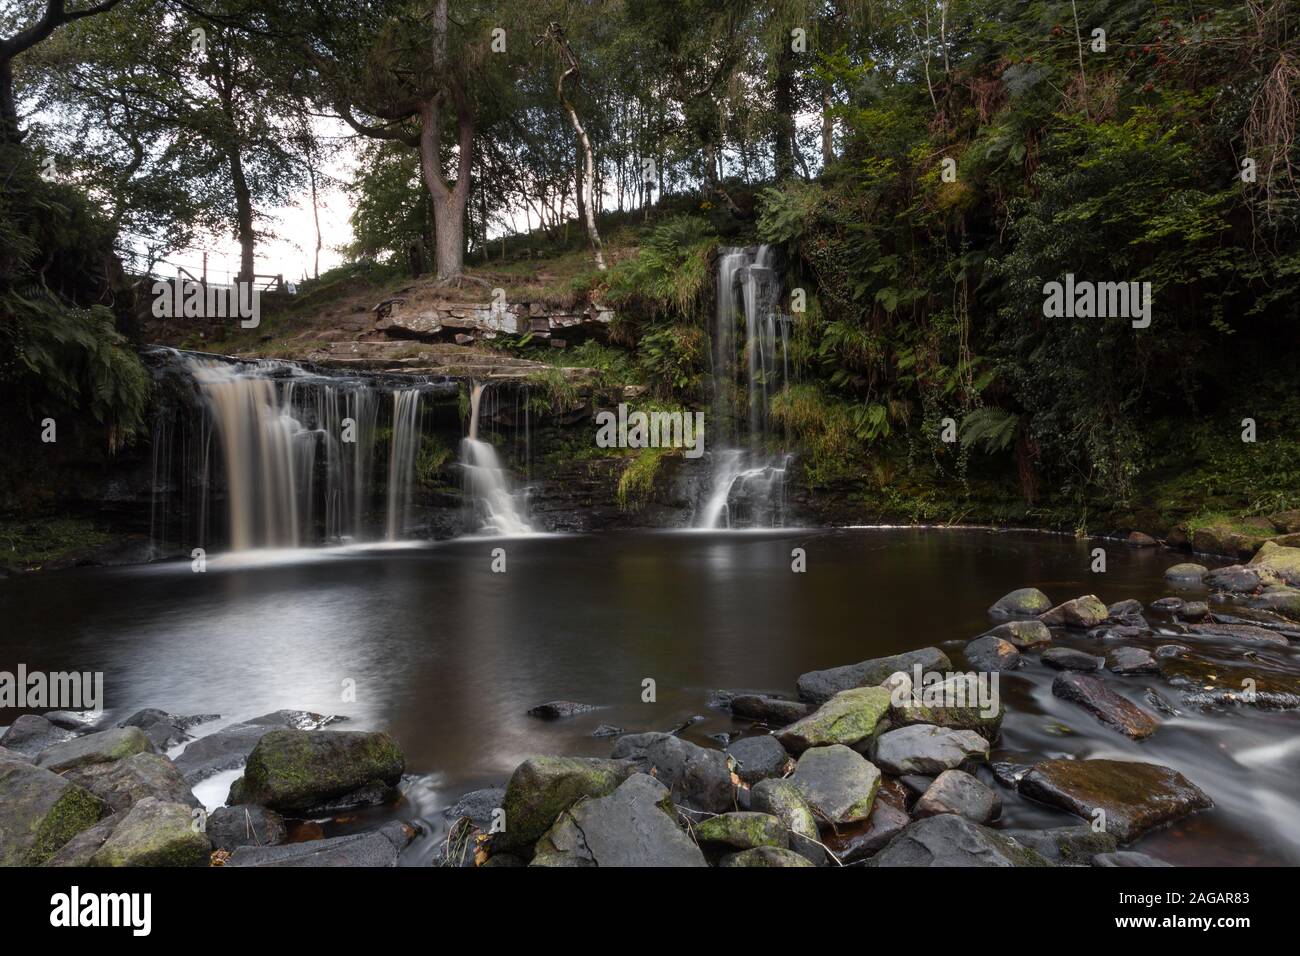 Lumb Falls, near the village of Pecket Well, which is north of Hebden Bridge in the Calder Valley, West Yorkshire. Stock Photo